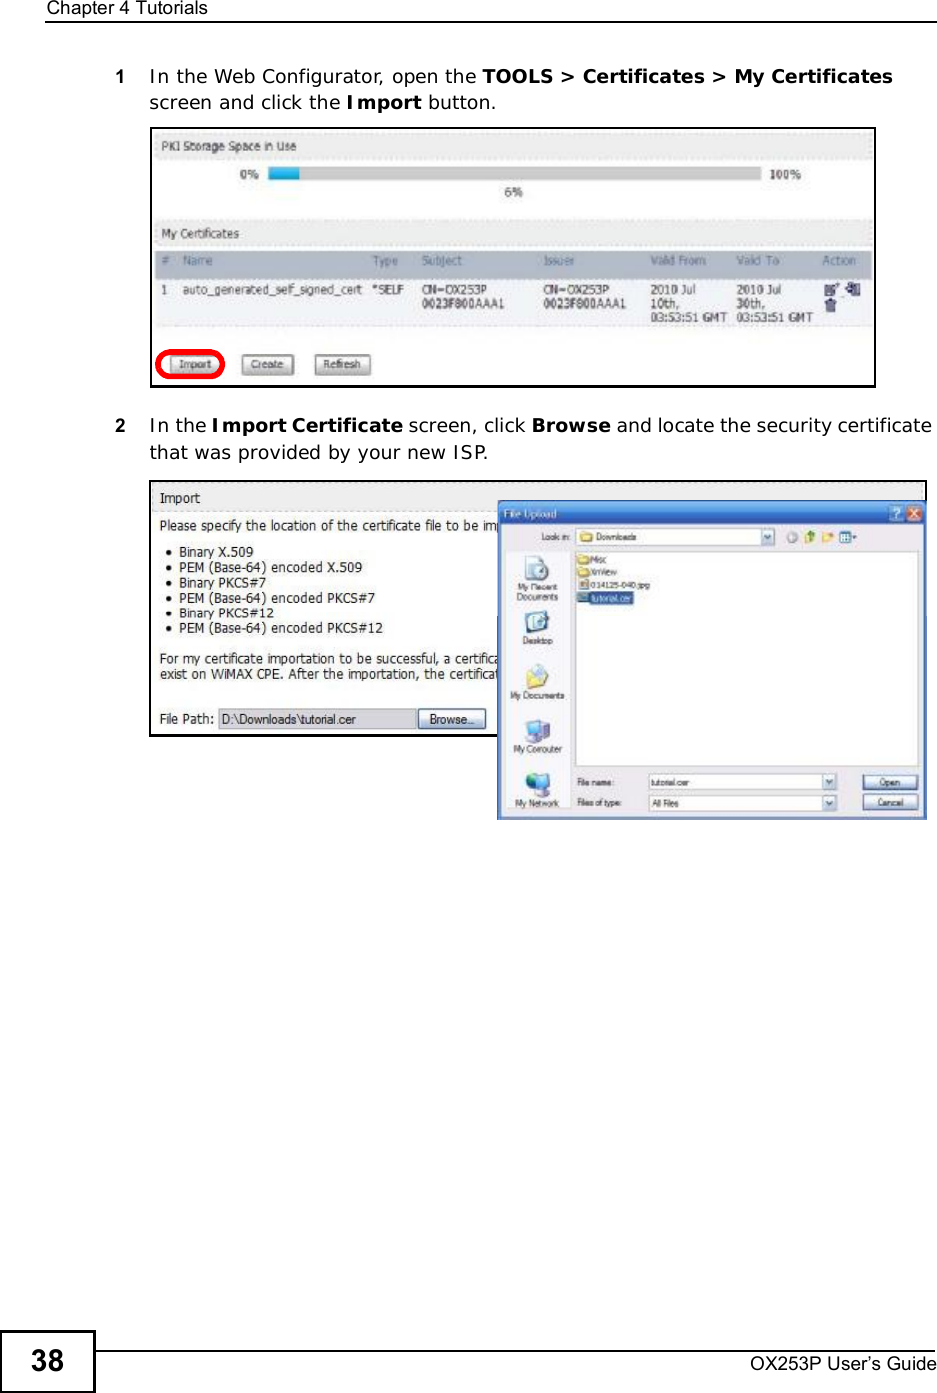 Chapter 4TutorialsOX253P User’s Guide381In the Web Configurator, open the TOOLS &gt; Certificates &gt; My Certificatesscreen and click the Import button.2In the Import Certificate screen, click Browse andlocate the security certificate that was provided by your new ISP.